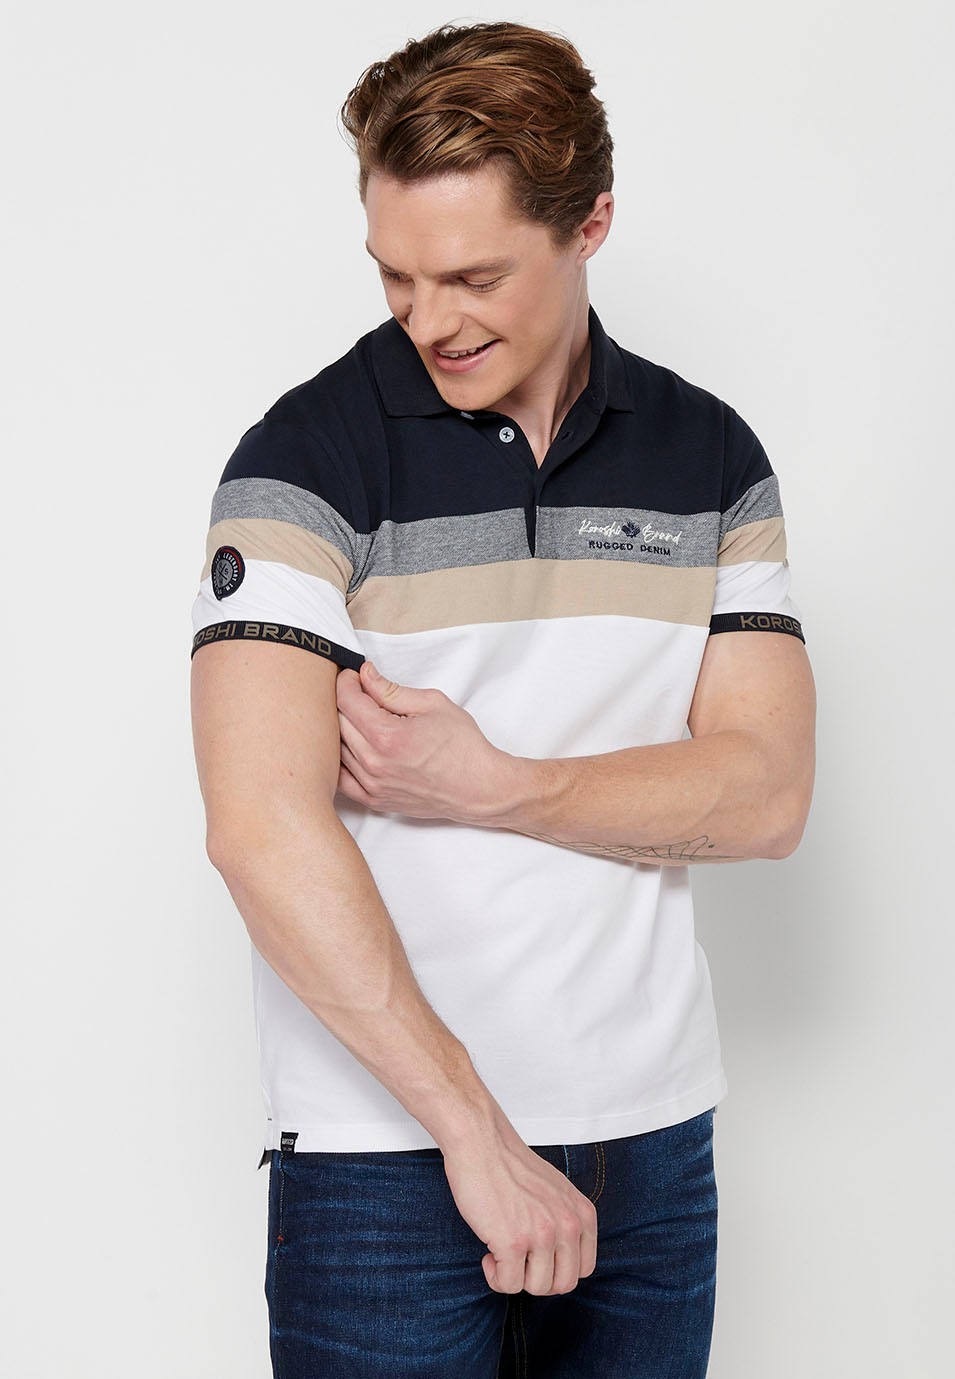 100% cotton short-sleeved polo shirt, striped detail on the chest, white color for men